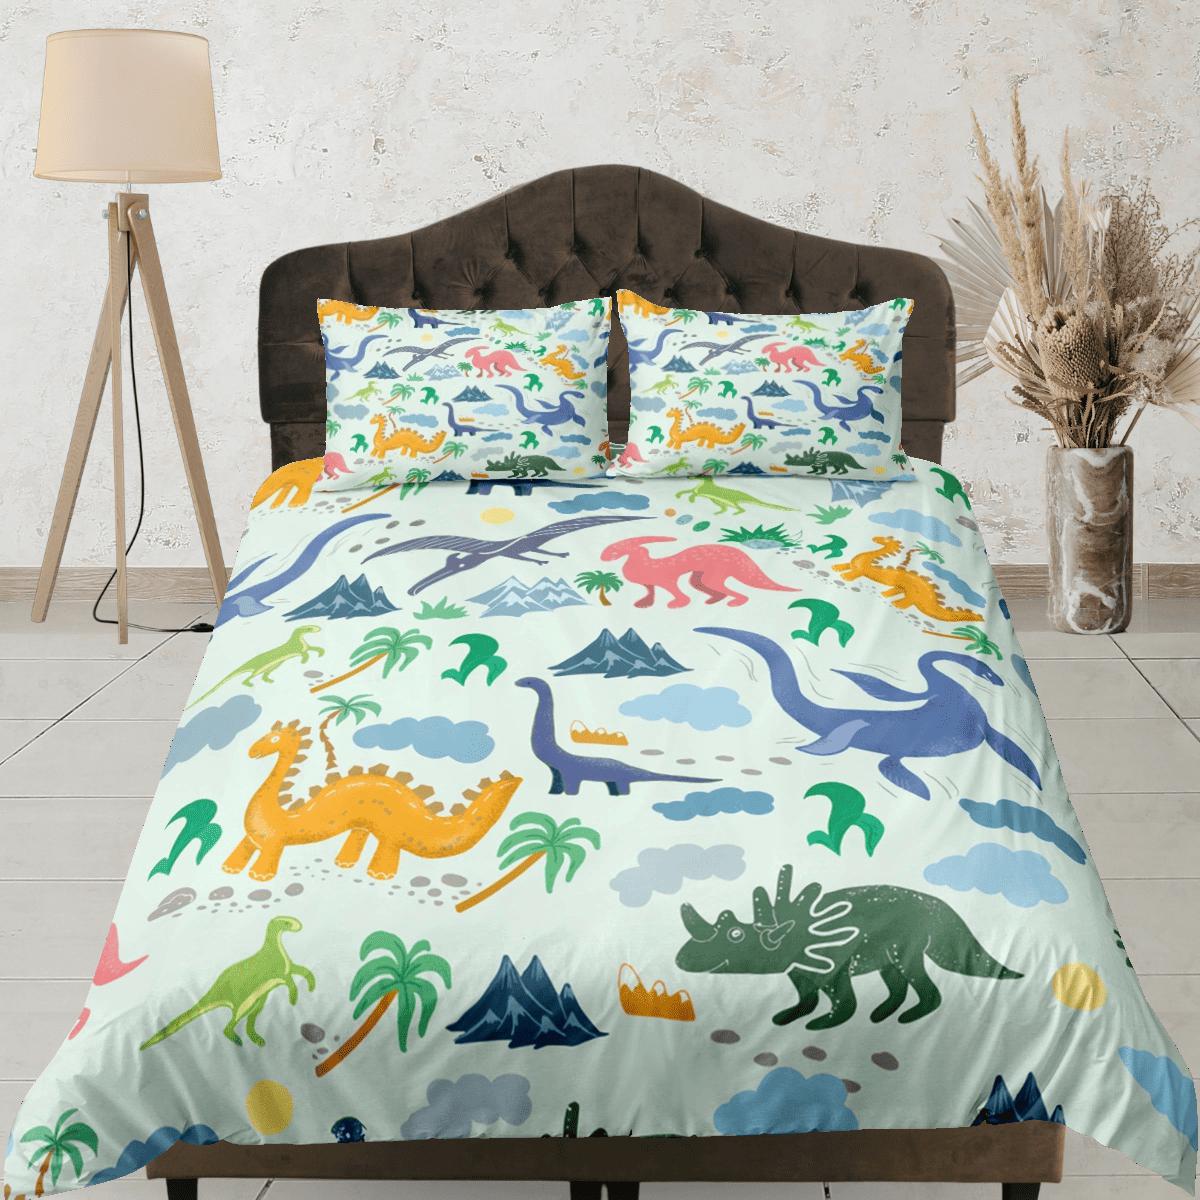 daintyduvet Dinosaurs Duvet Cover Set Colorful Bedspread, Kids Full Bedding Set with Pillowcase, Comforter Cover Bed